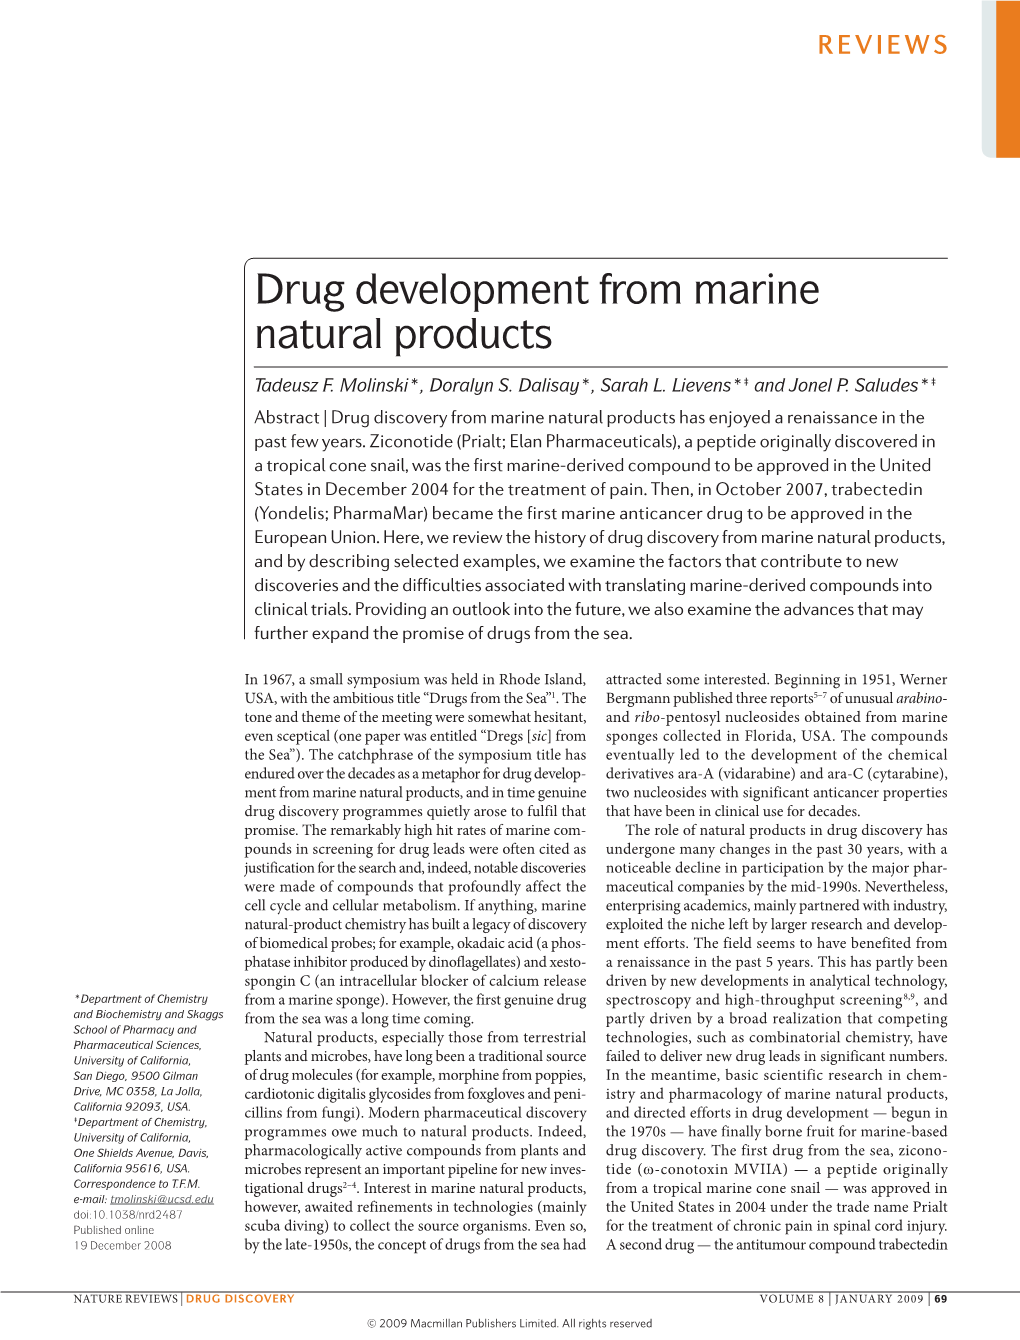 Drug Development from Marine Natural Products